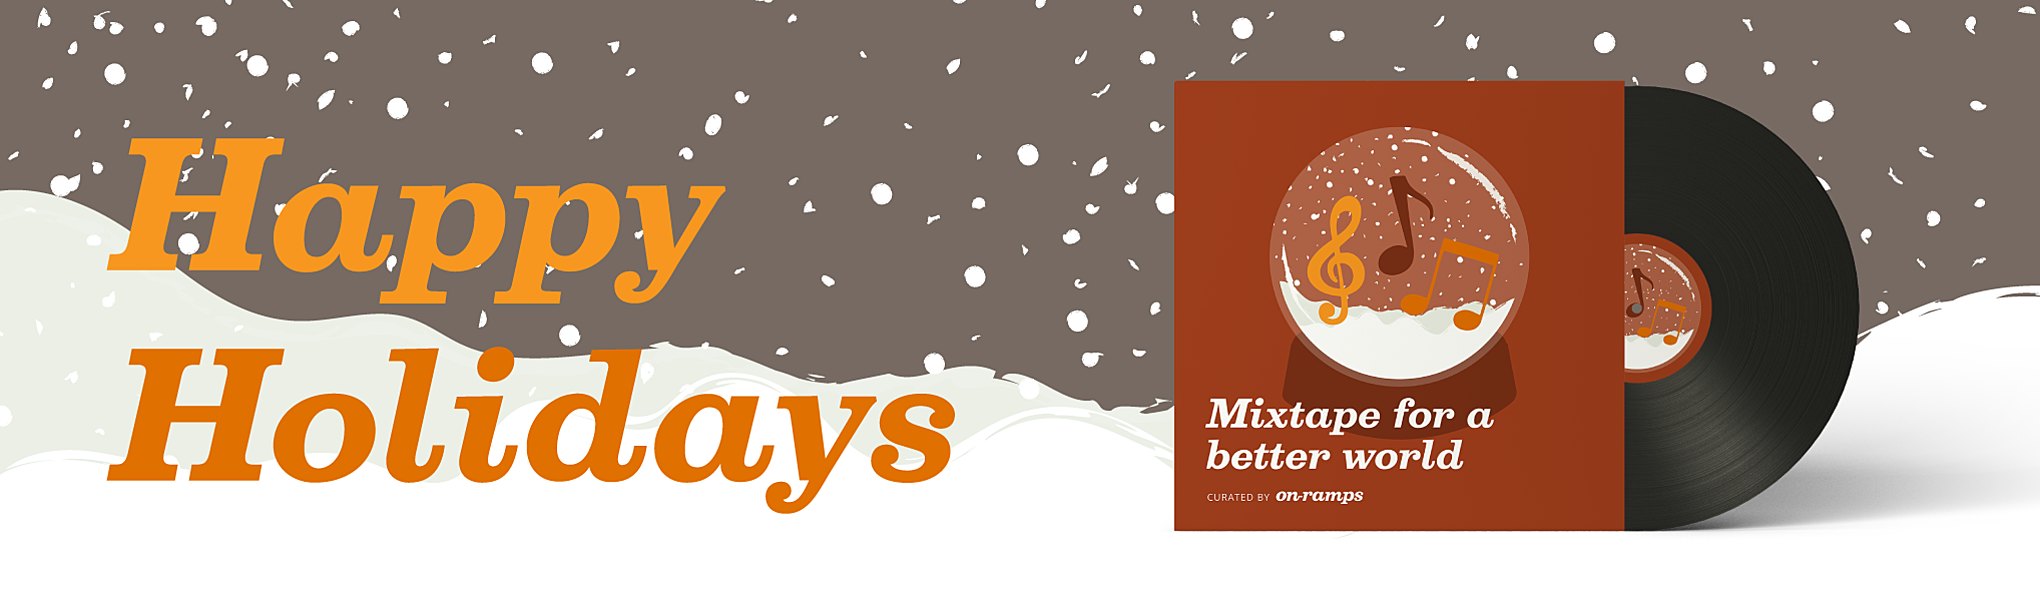 "Happy Holidays" written in orange letters over a background of snow. To the right is a record poking out of its jacket, which reads "Mixtape for a better world curated by On-Ramps"